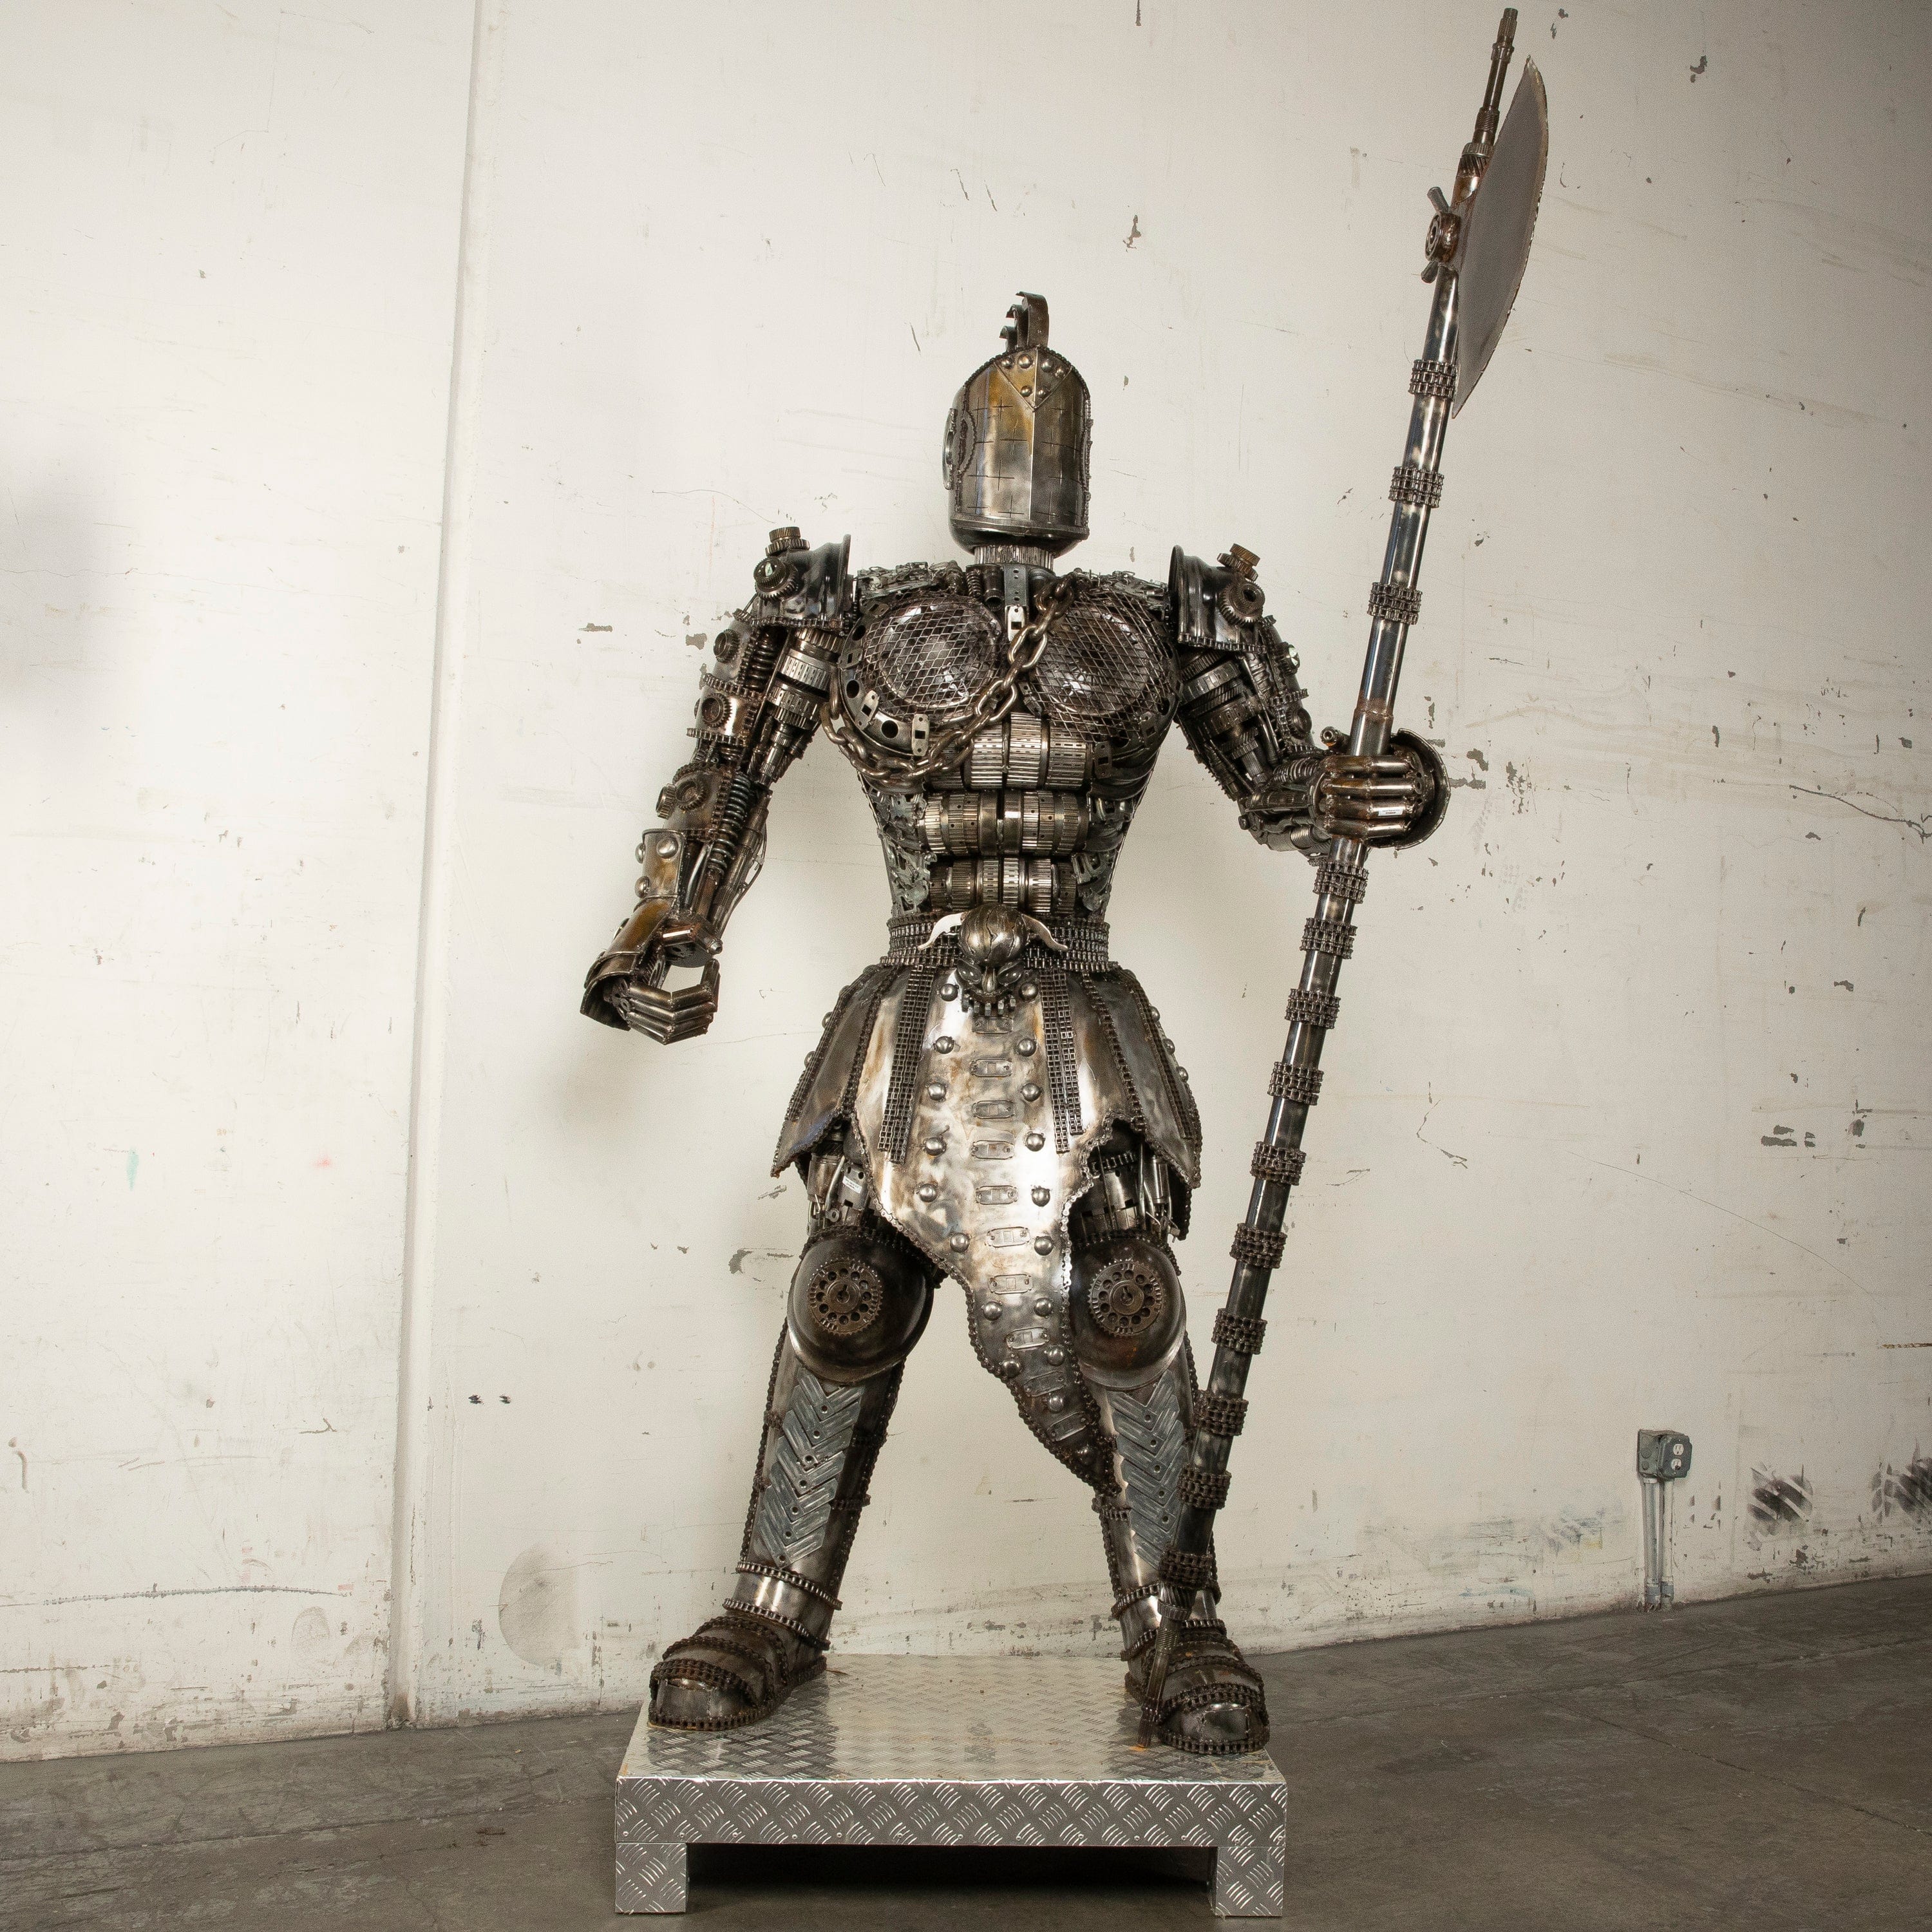 Kalifano Recycled Metal Art 91" Knight Recycled Metal Art Sculpture RMS-KN230-S16